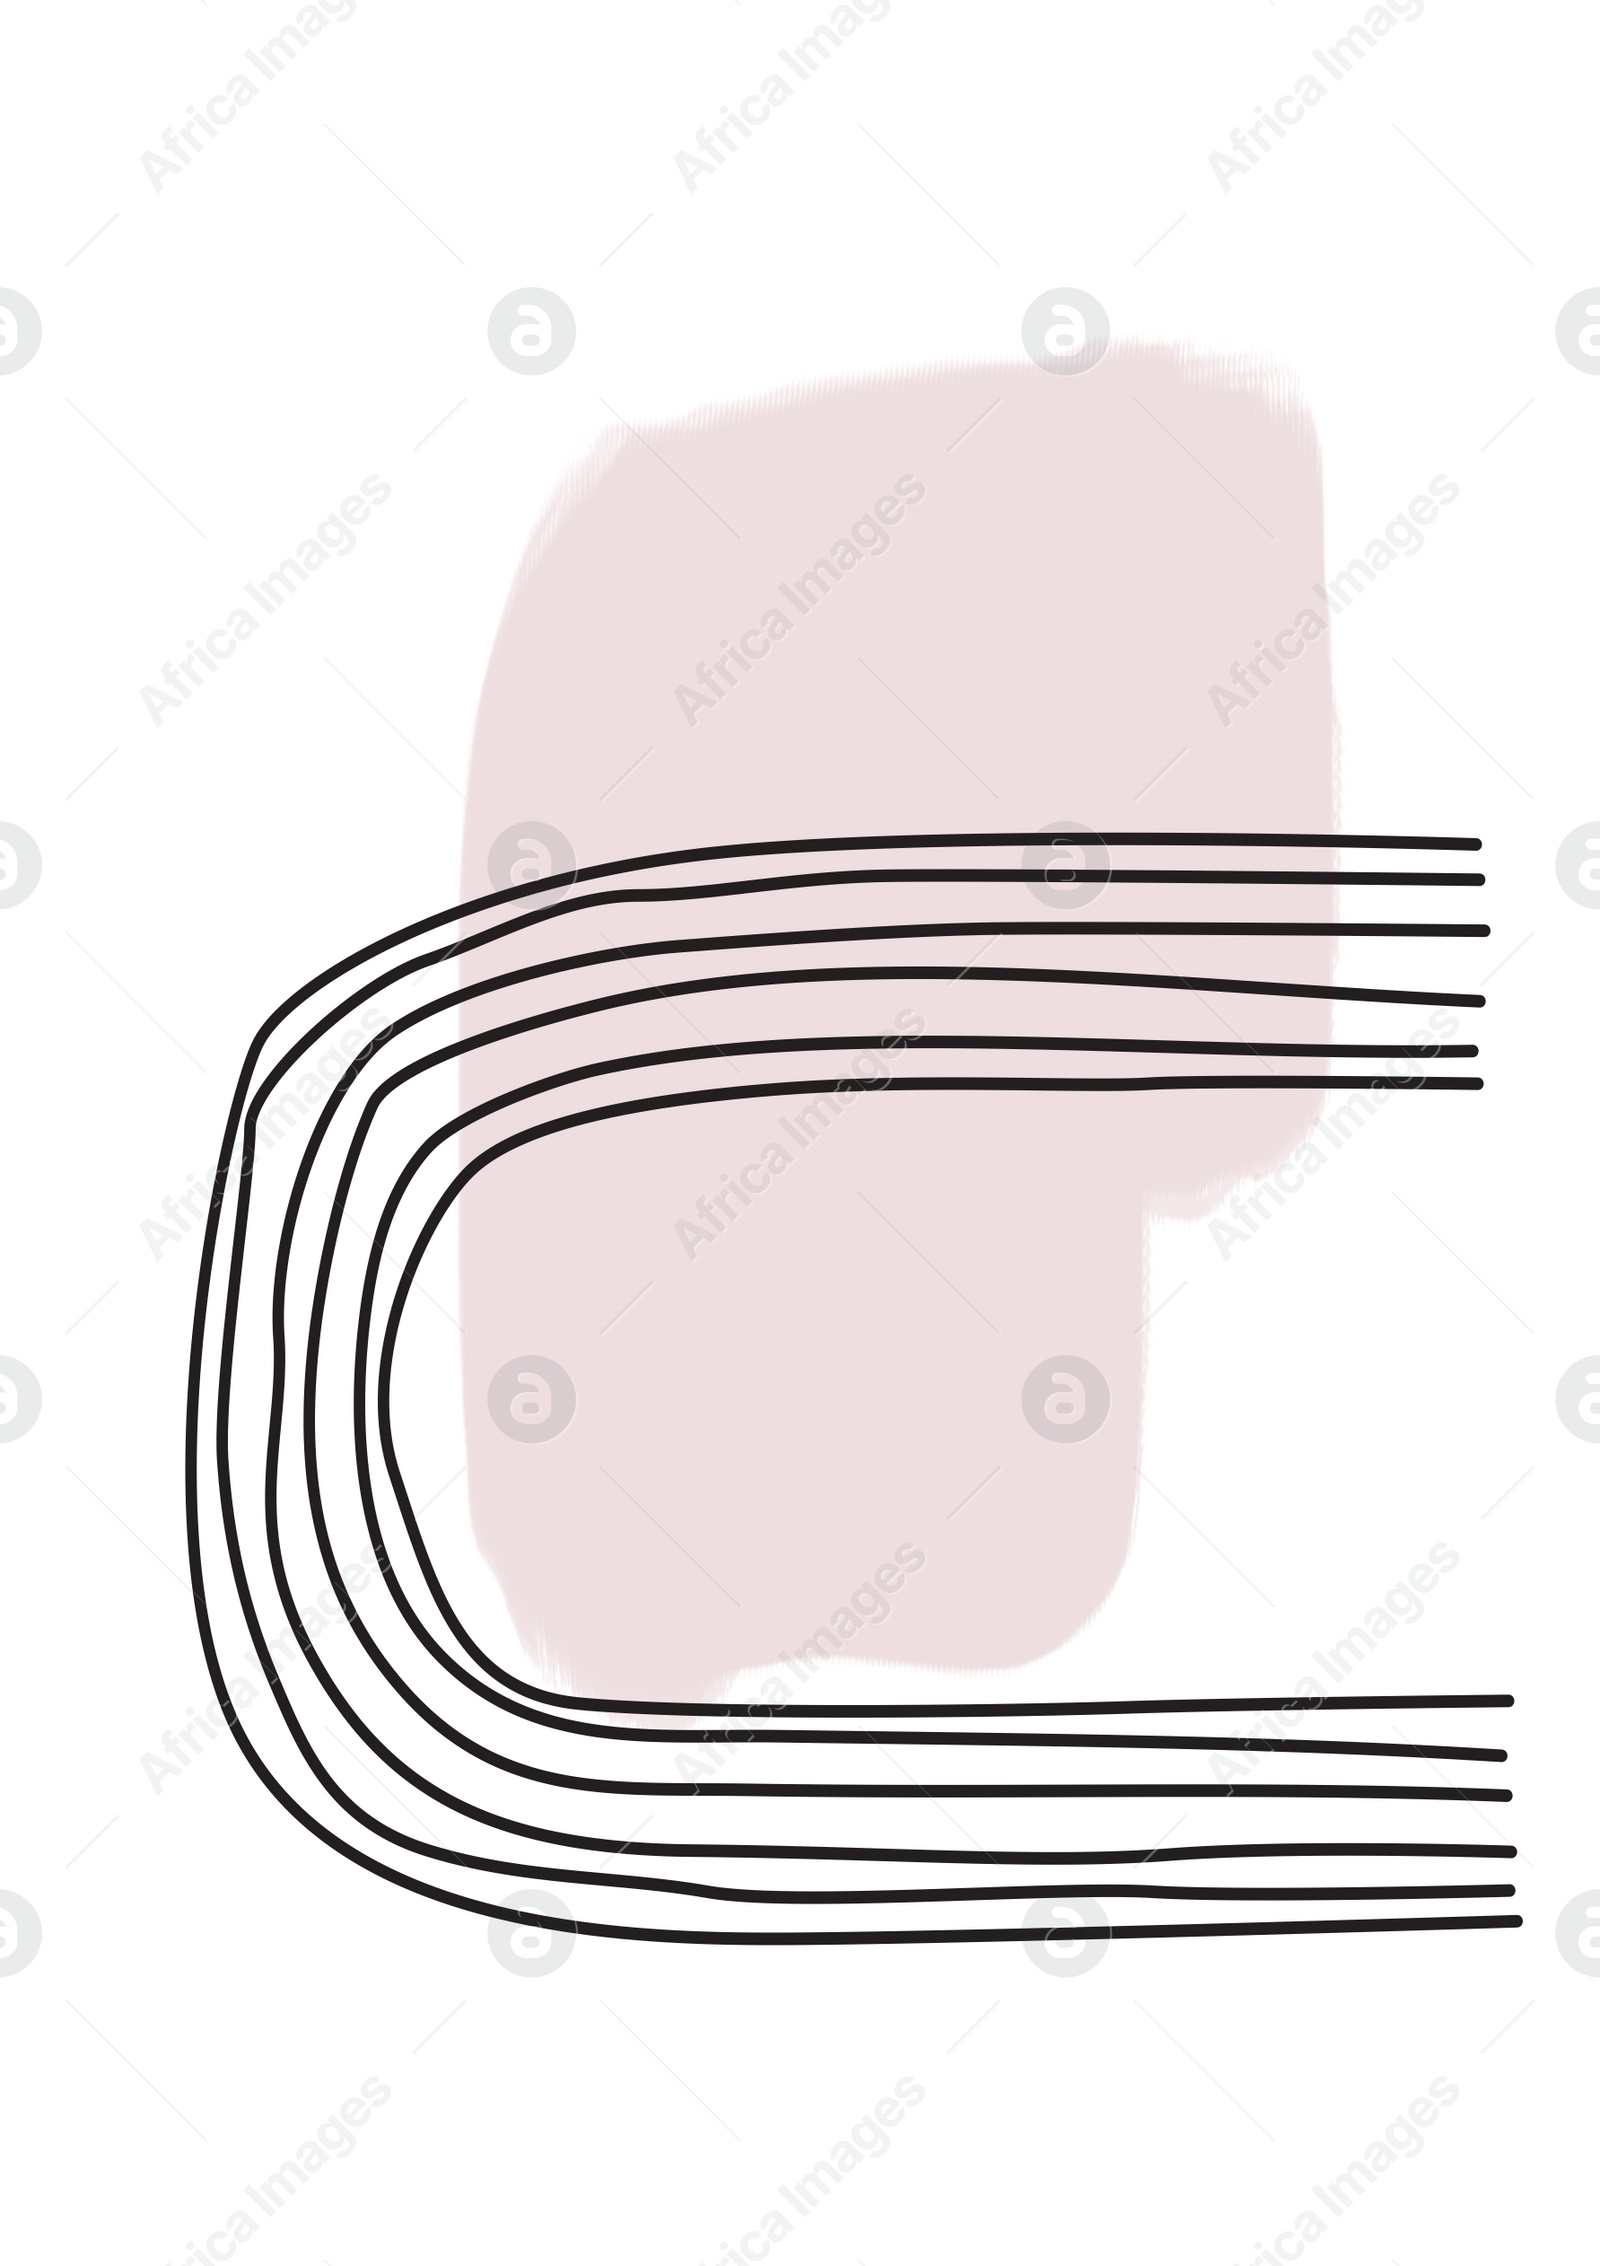 Illustration of Beautiful image with abstract shape and curly lines in different colors